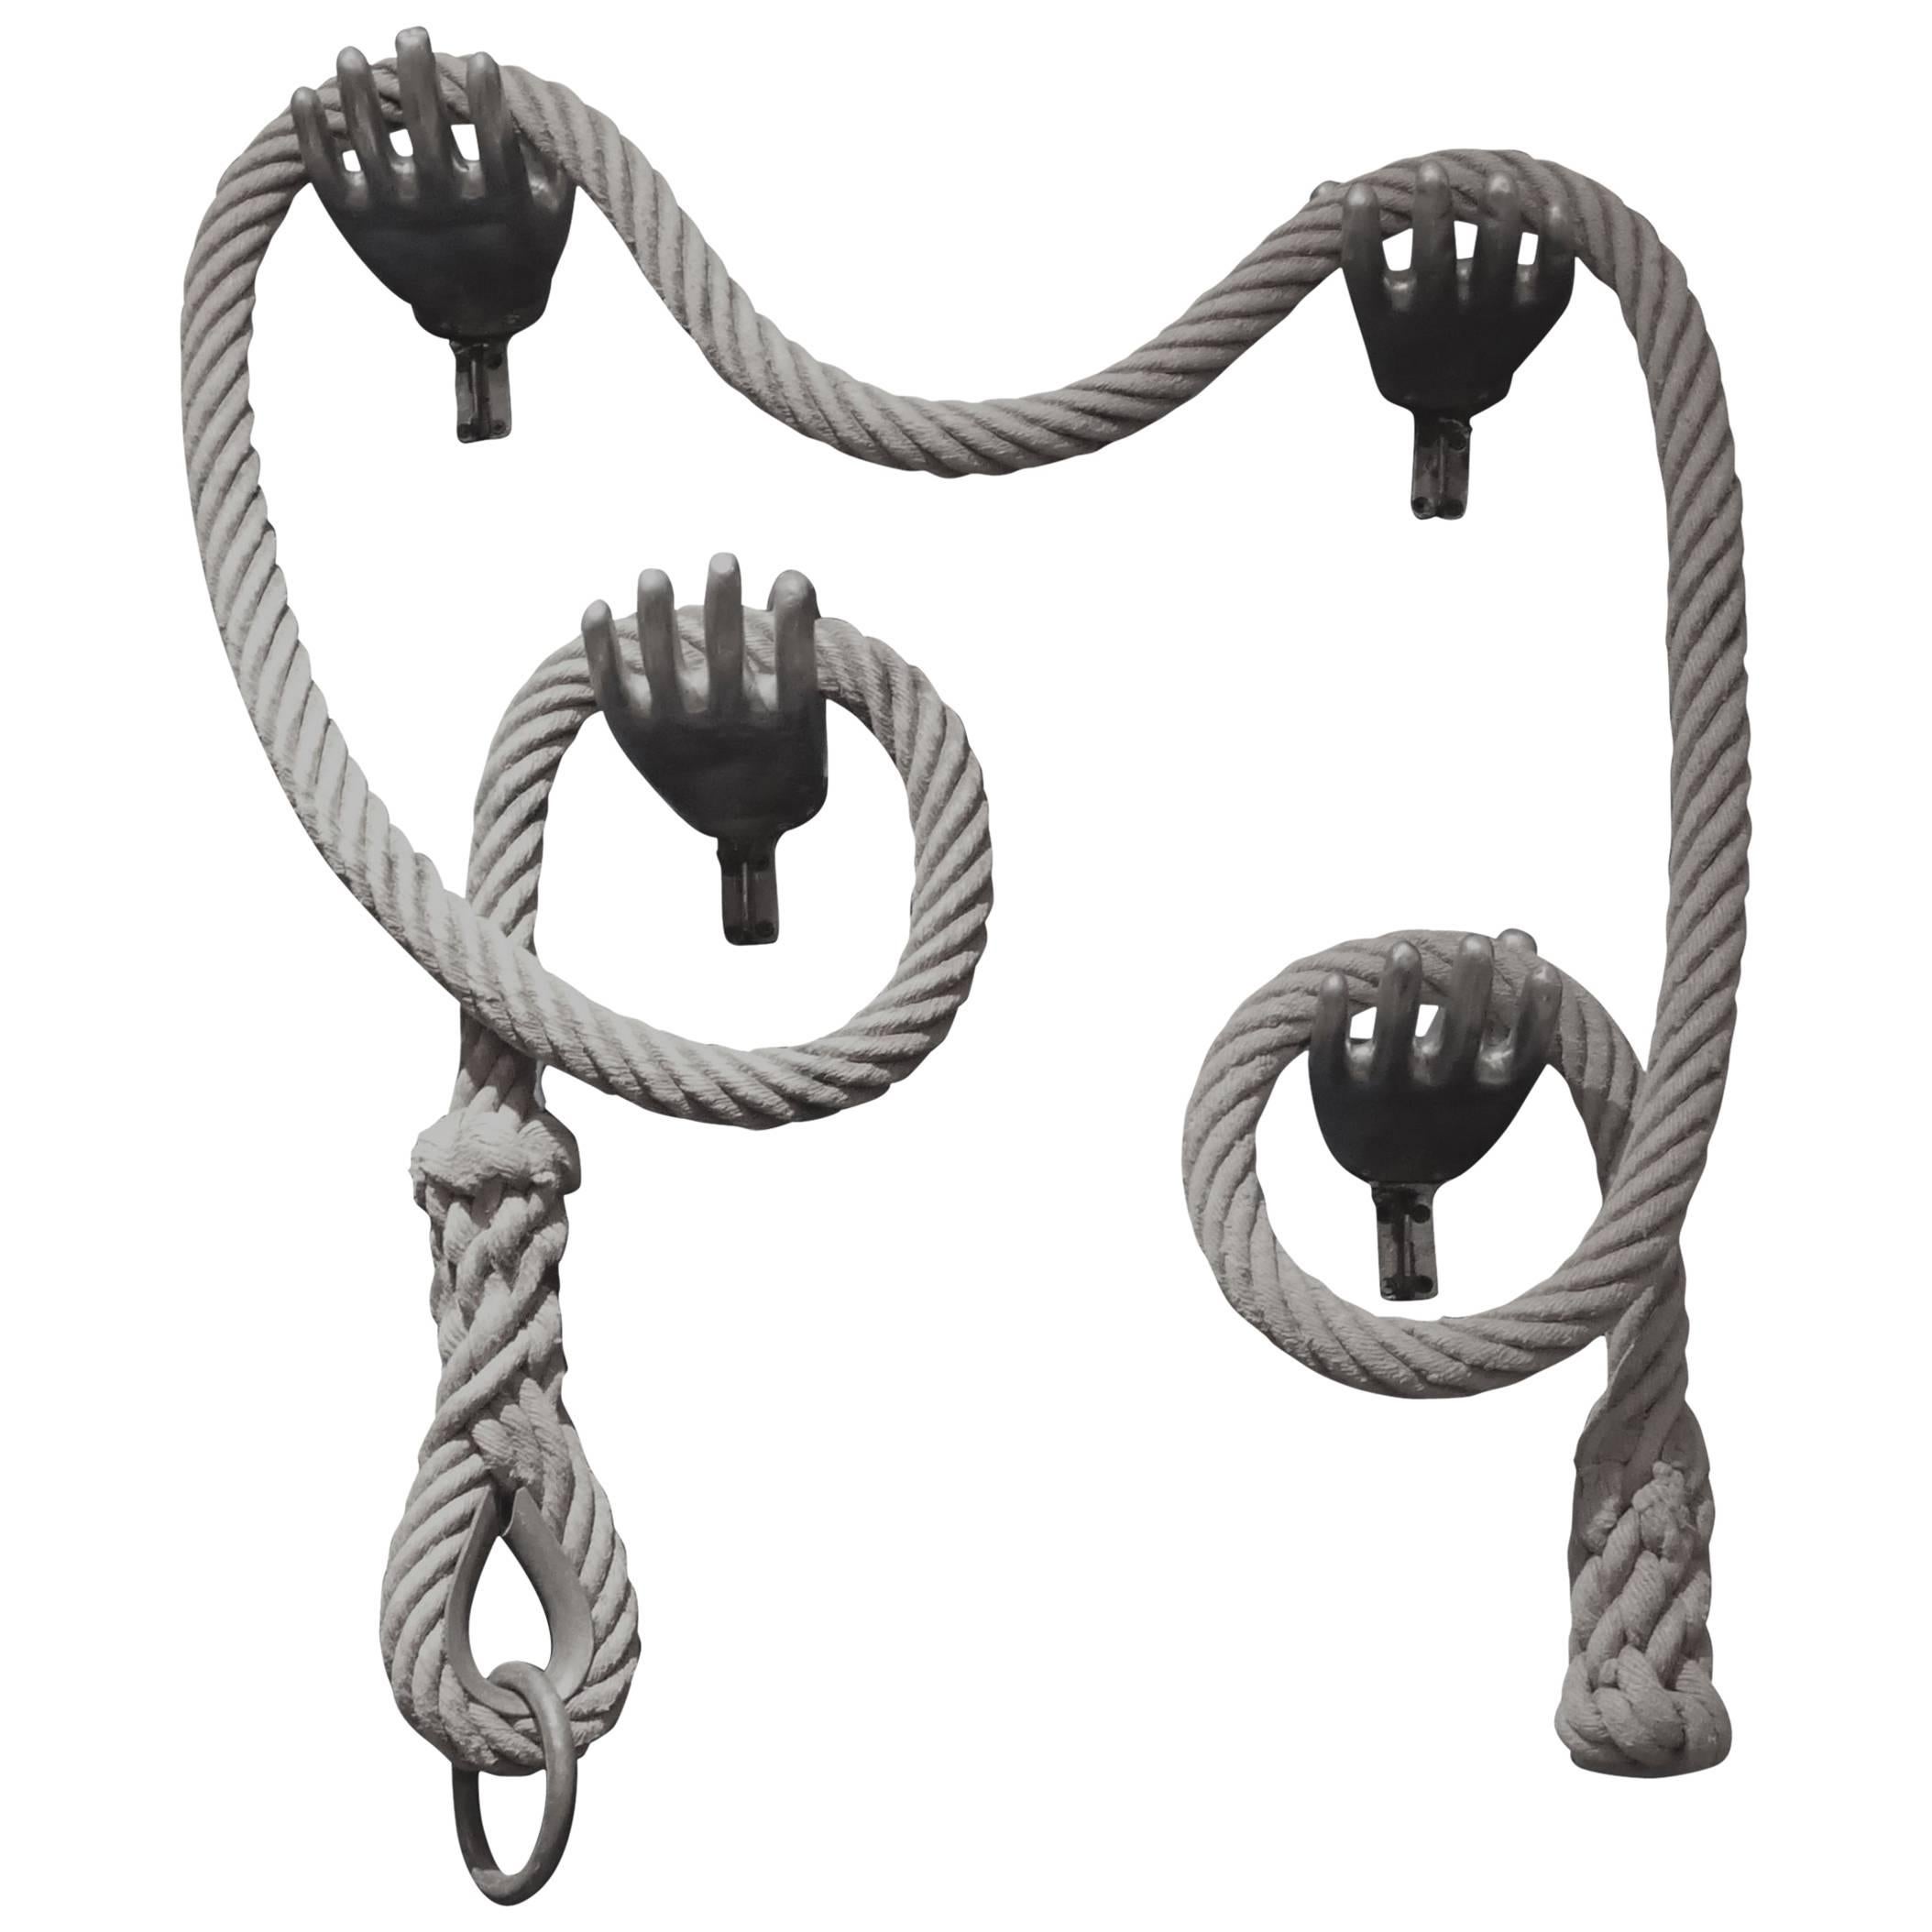 Rope and Glove Mold Sculpture